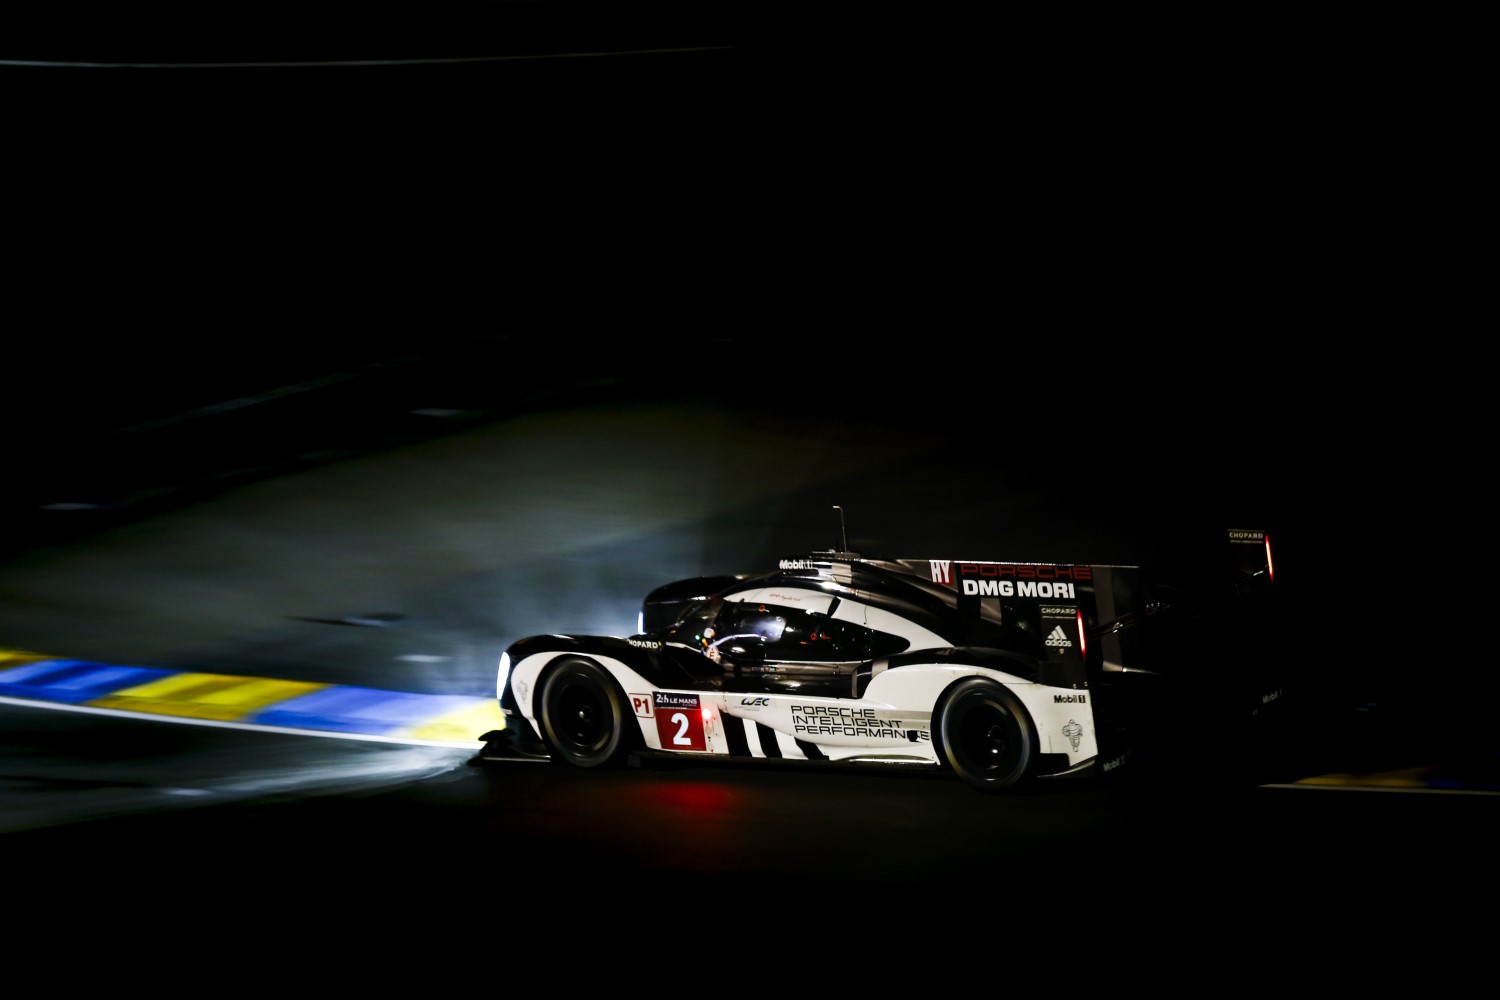 #2 Porsche led at the 9-hour mark but not for long